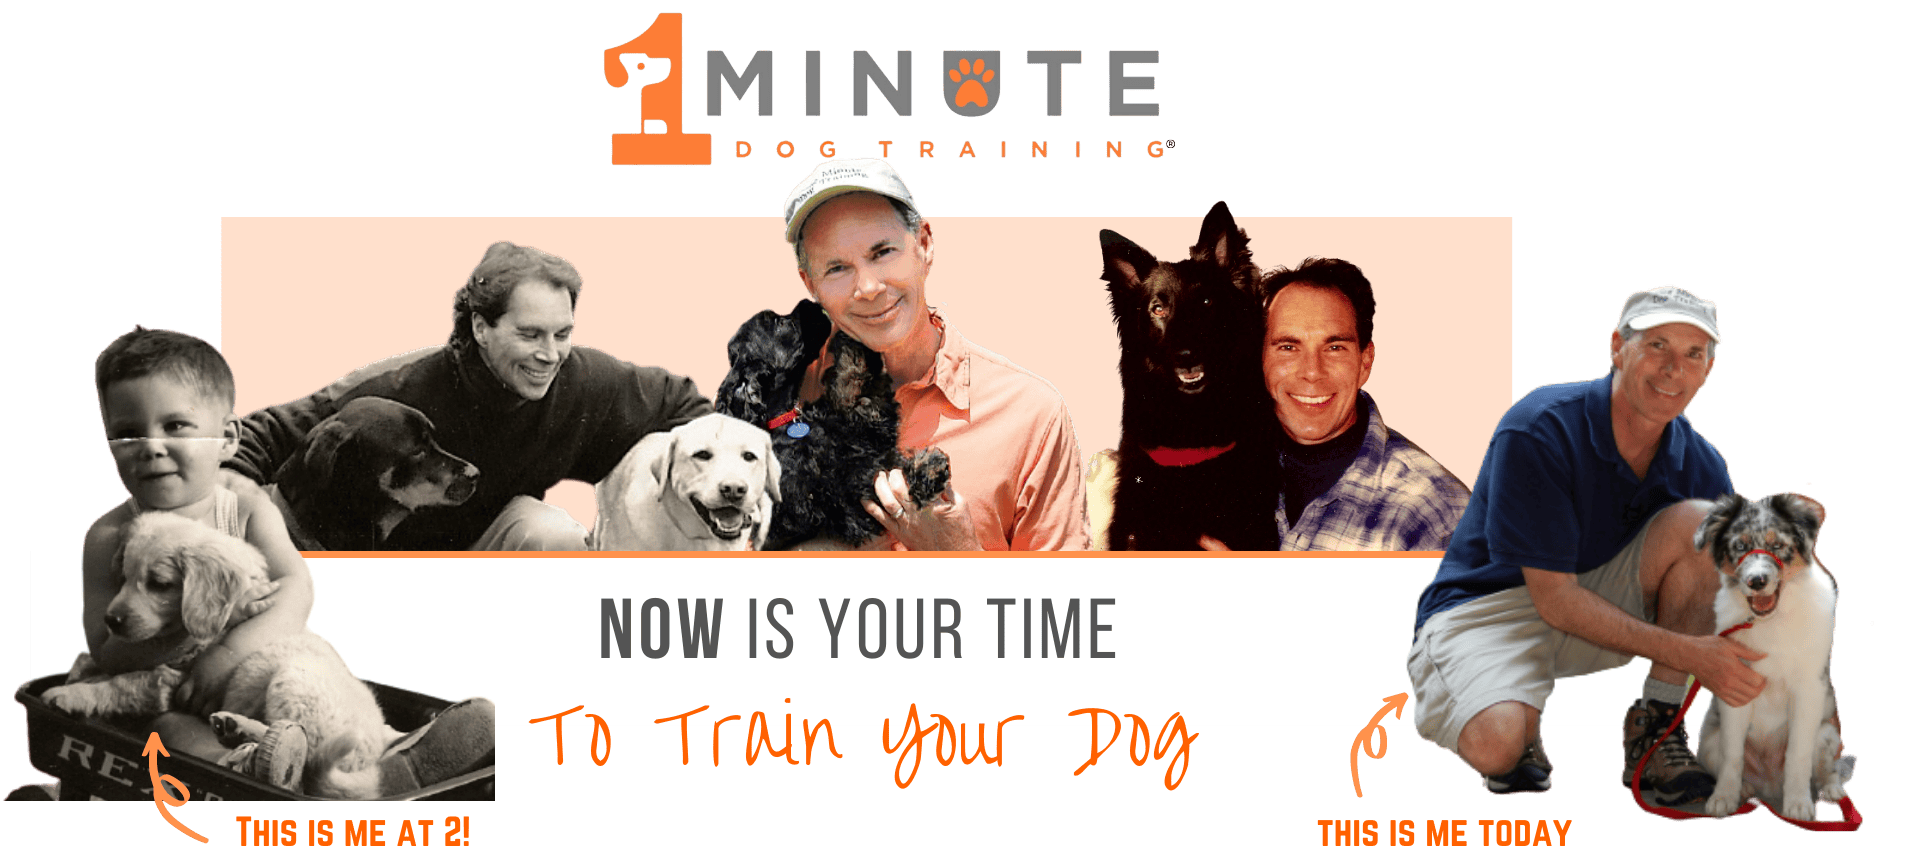 Learn how you can train your dog with the help of Tom Mitchell, the 1 Minute Dog Trainer.